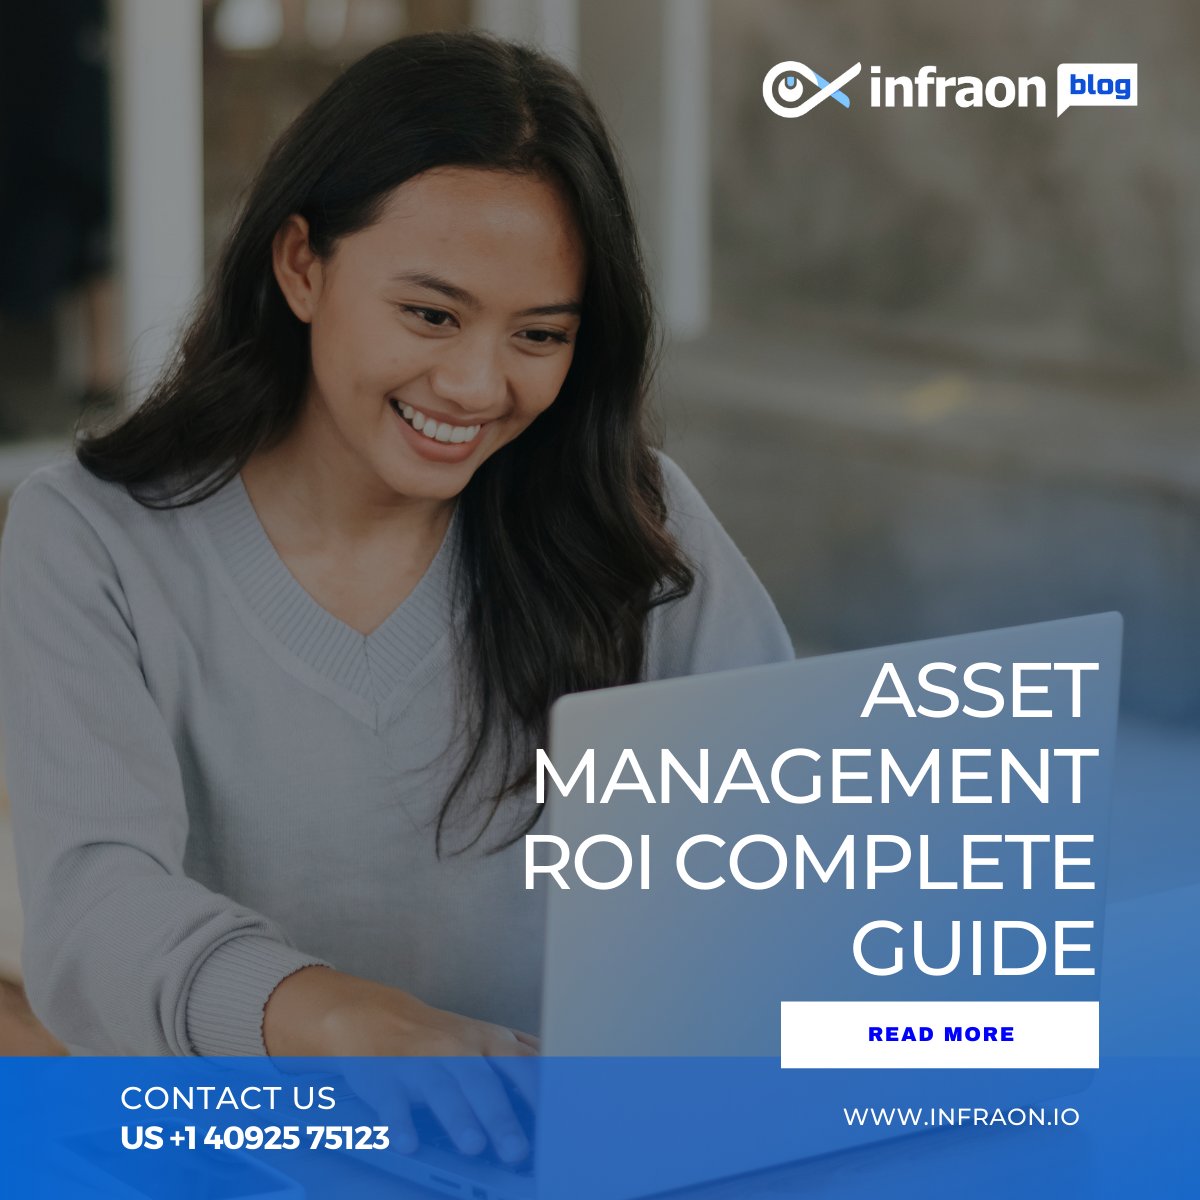 Boost your business with effective #Asset #Management! 

Read our latest blog bit.ly/3NS6bpd Level up your business and maximize returns with Asset Management!

#AssetManagement #ROI #BusinessSuccess #Efficiency #Optimization #CostSavings #DataAnalytics #infraon #saas